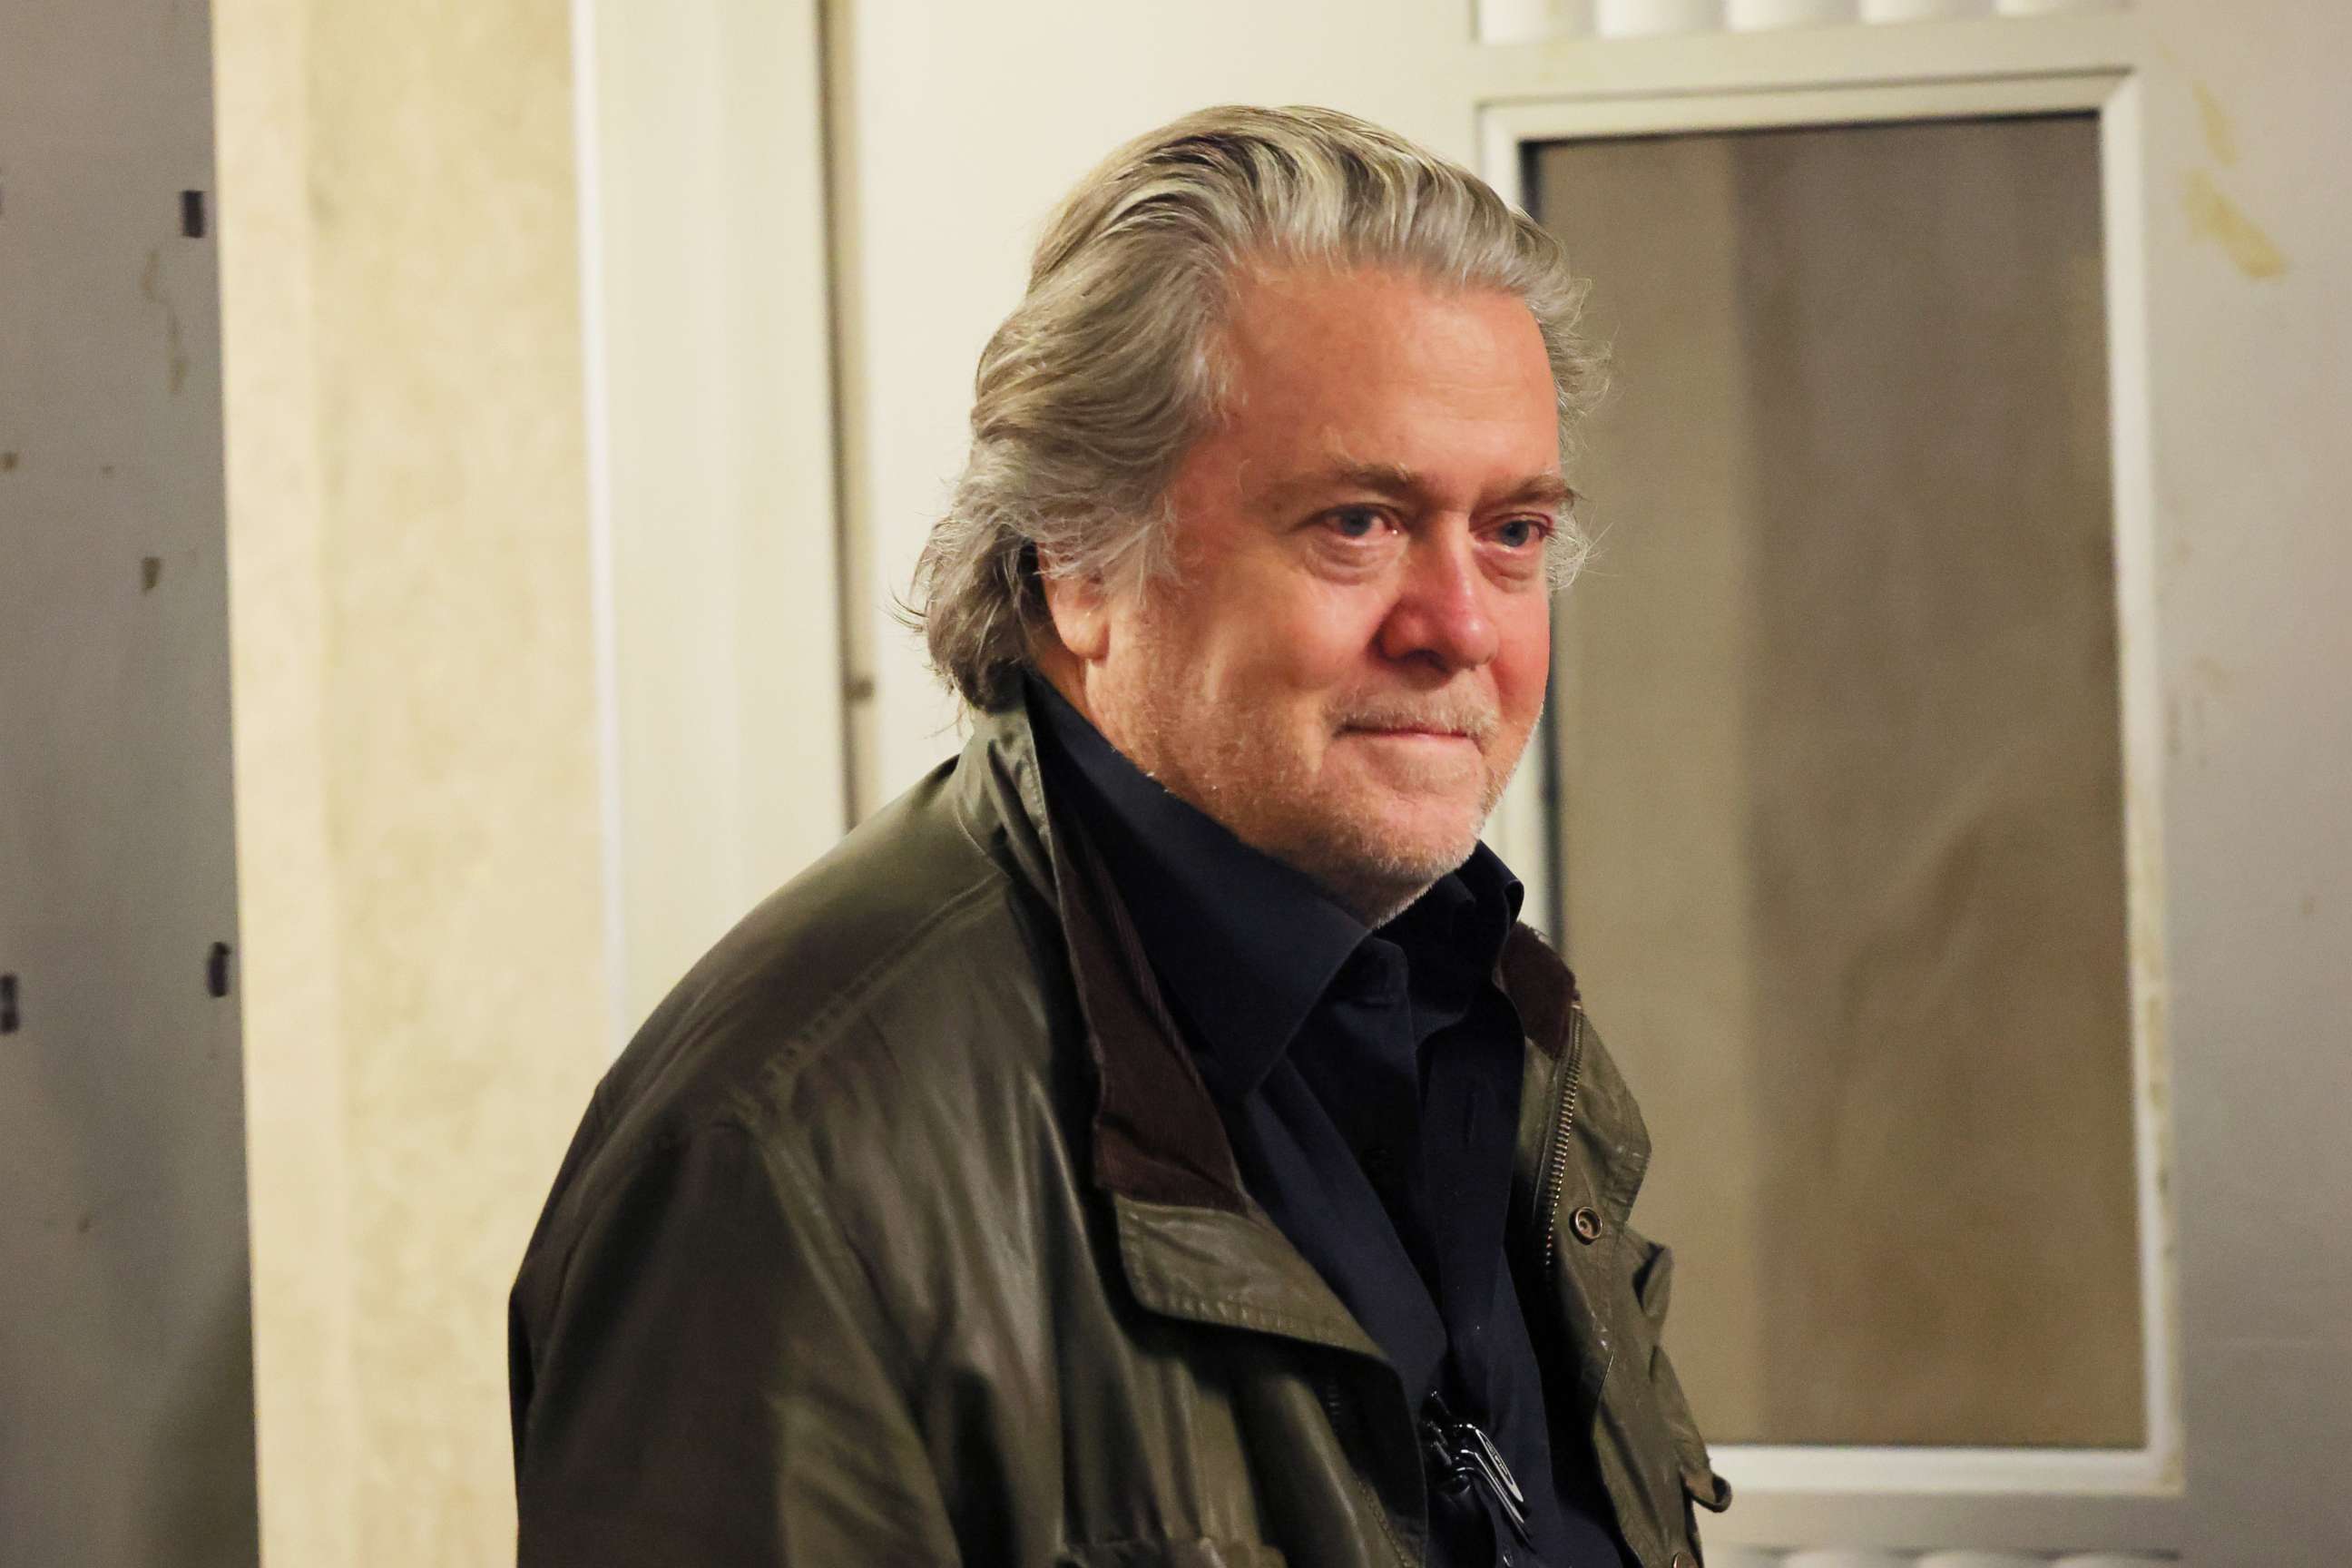 PHOTO: Steve Bannon, former adviser to President Donald Trump, leaves after a court appearance at NYS Supreme Court on Oct. 4, 2022, in New York City.